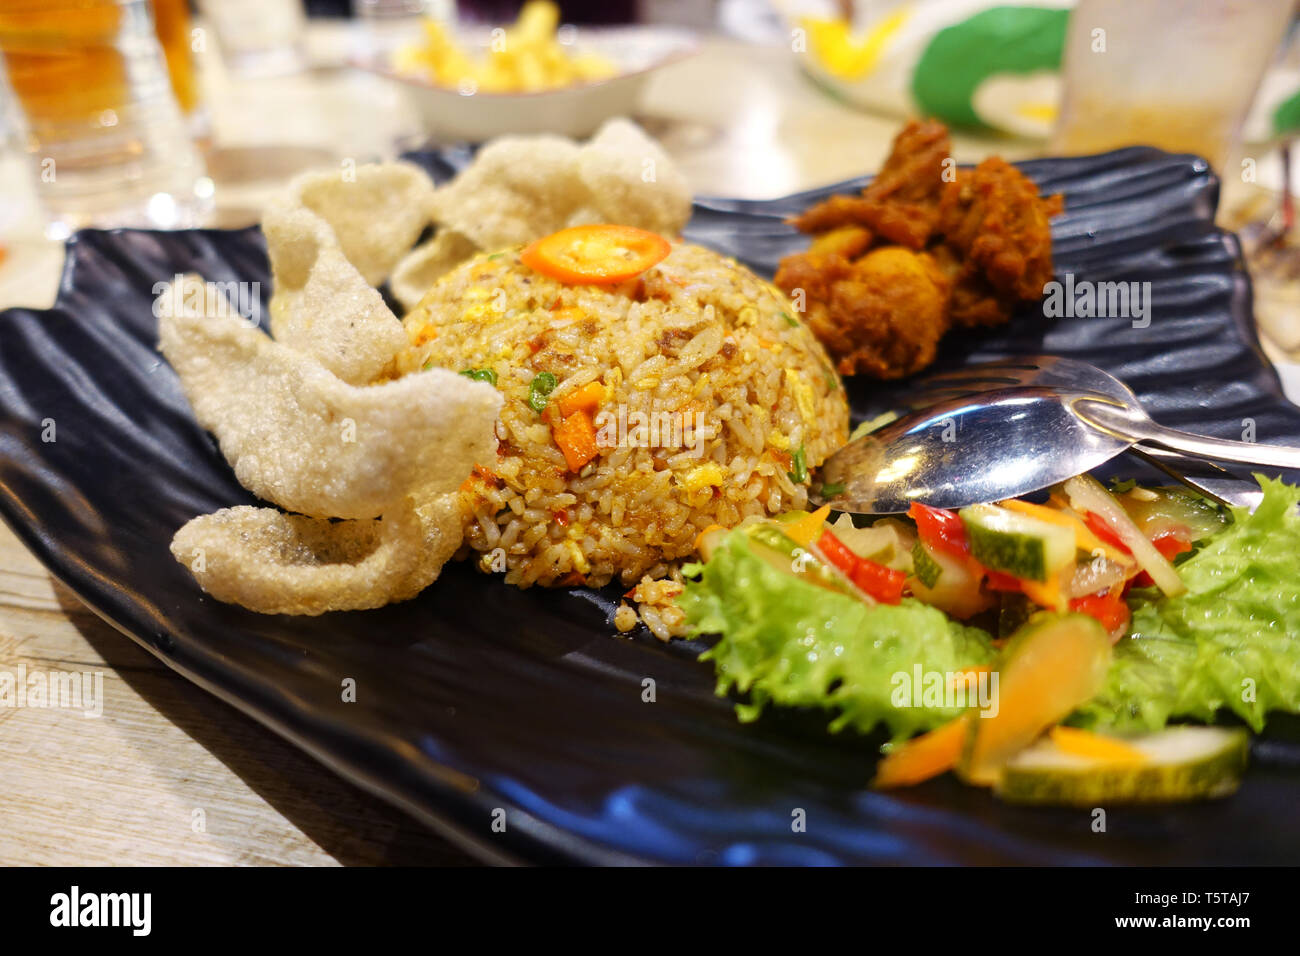 Fried rice with fish crackers and fried chicken with salad Stock Photo